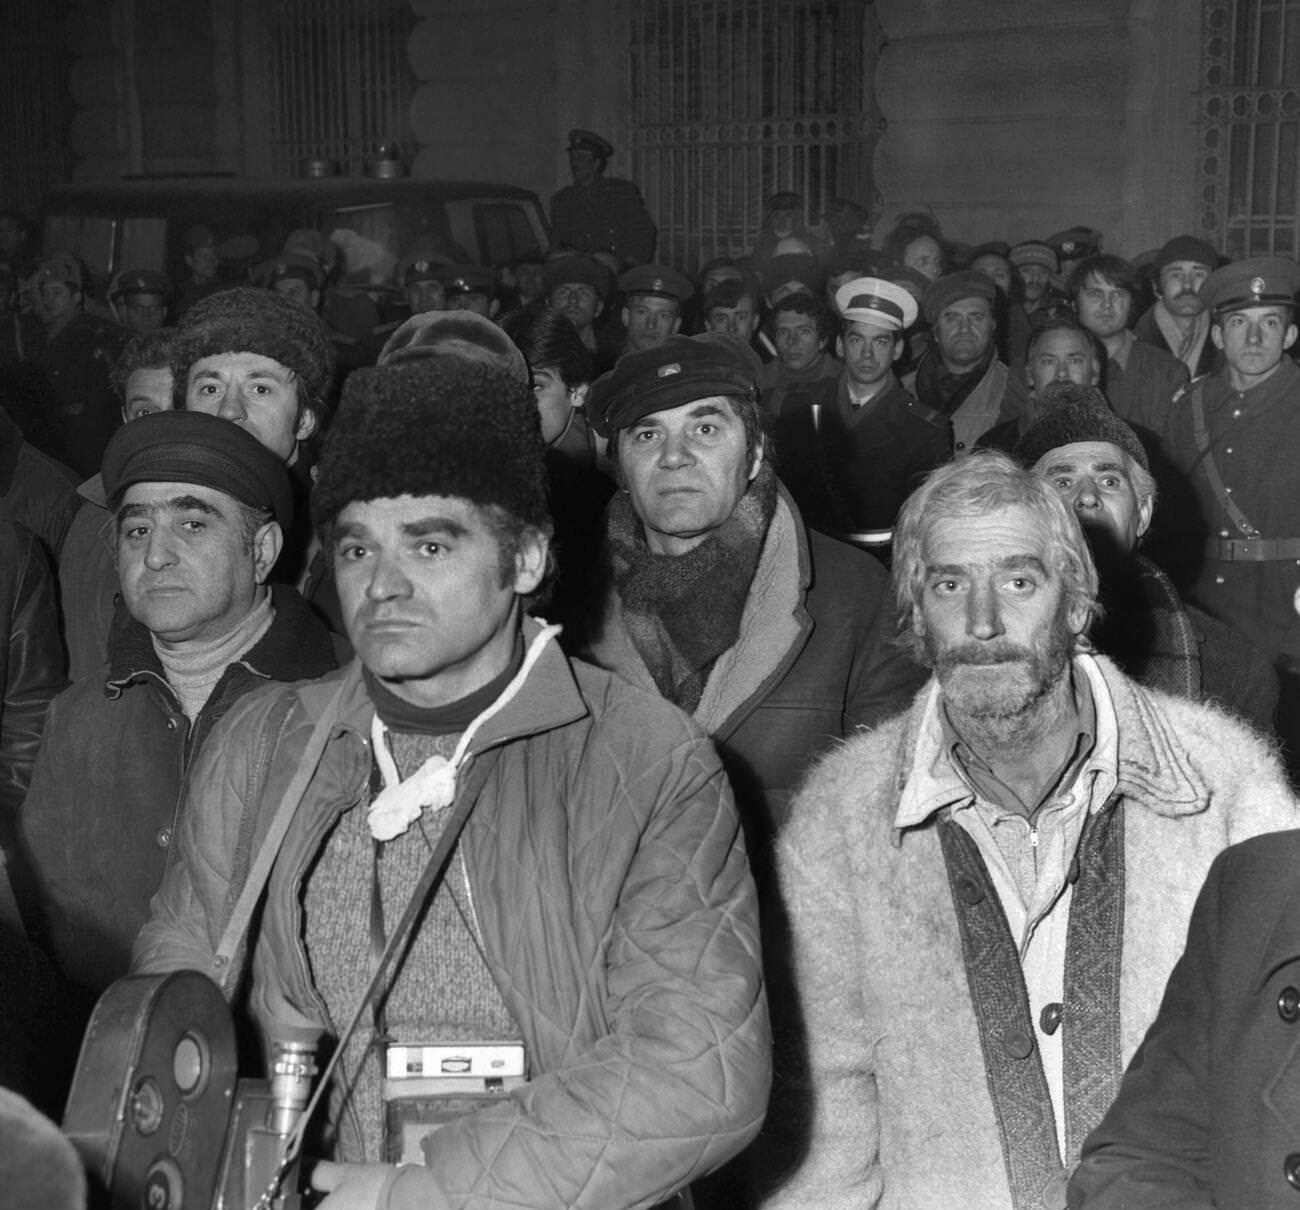 Crowd in Bucharest after the deadly earthquake, with Dinu Sararu, Ion Caramitru, and Ion Besoiu, March 4, 1977.